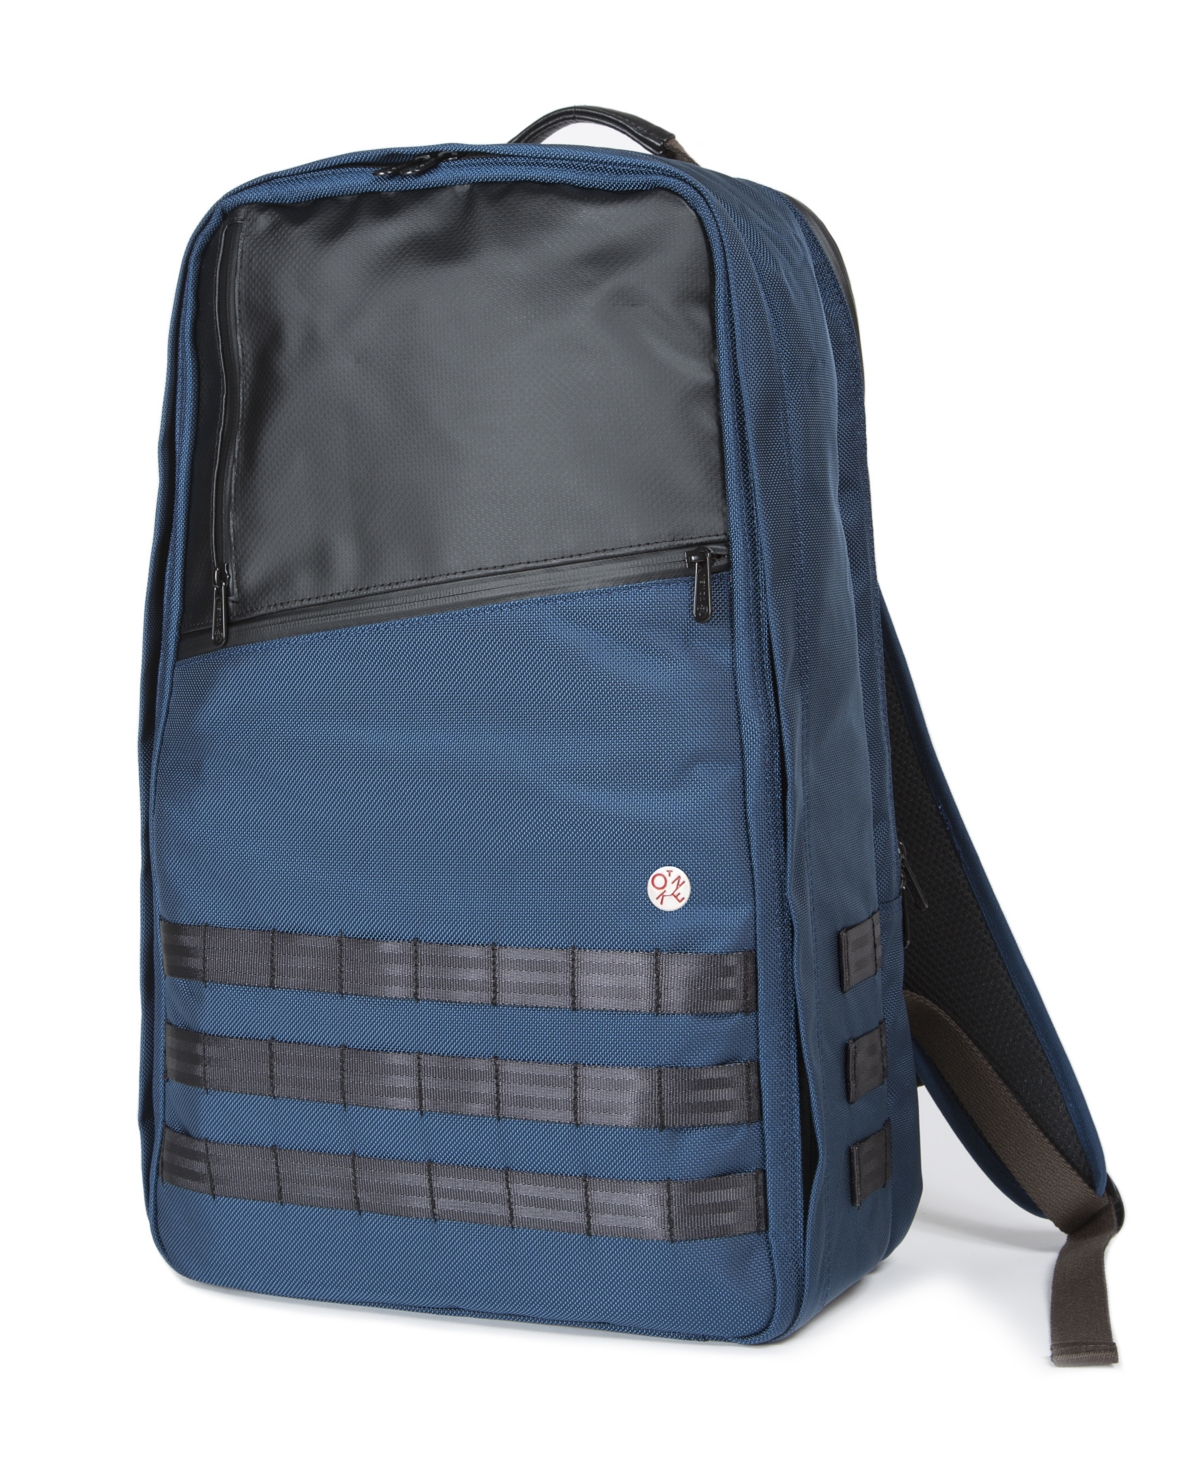 Grand Army Large Backpack - Navy